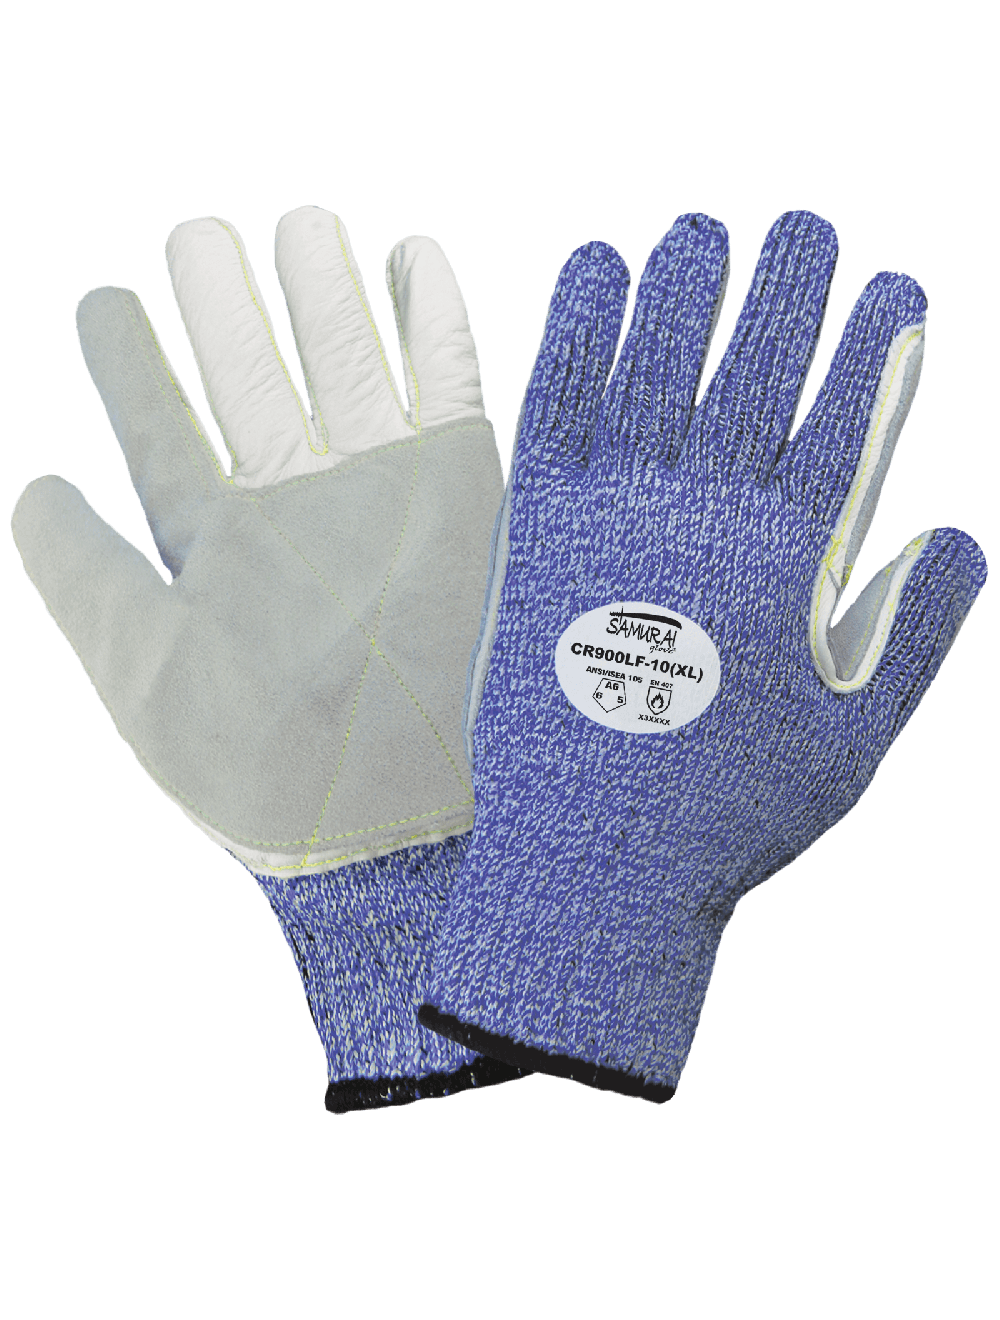 Samurai Glove® Cut, Abrasion, and Puncture Resistant Tuffalene® Gloves with Reinforced Premium Cowhide Leather Palm - CR900LF